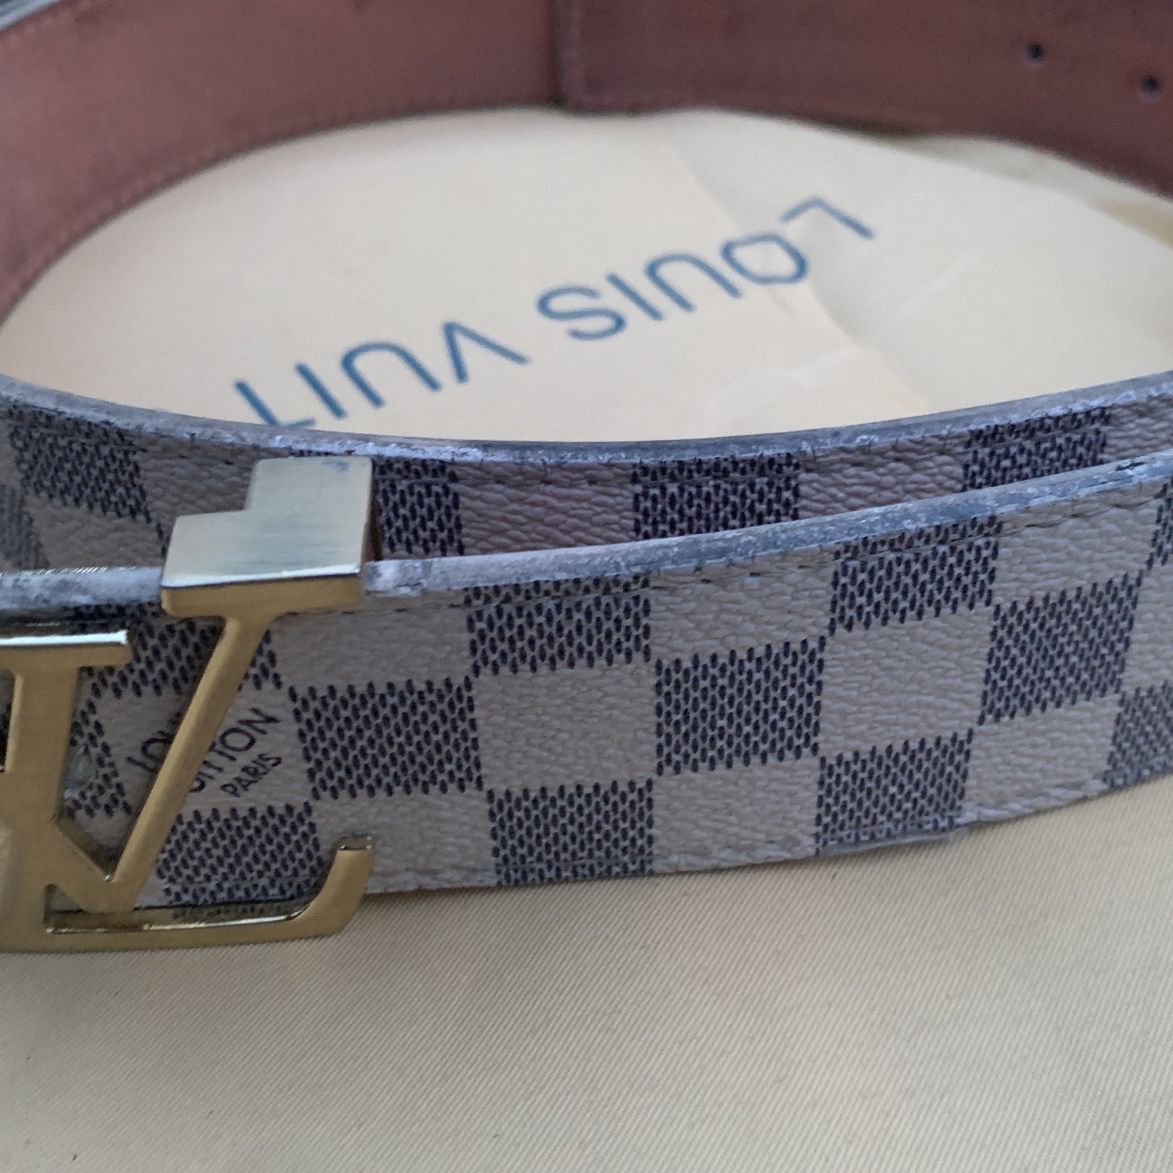 Supreme Lv Belt Buddha And Cartier Braclet for Sale in Chattanooga, TN -  OfferUp